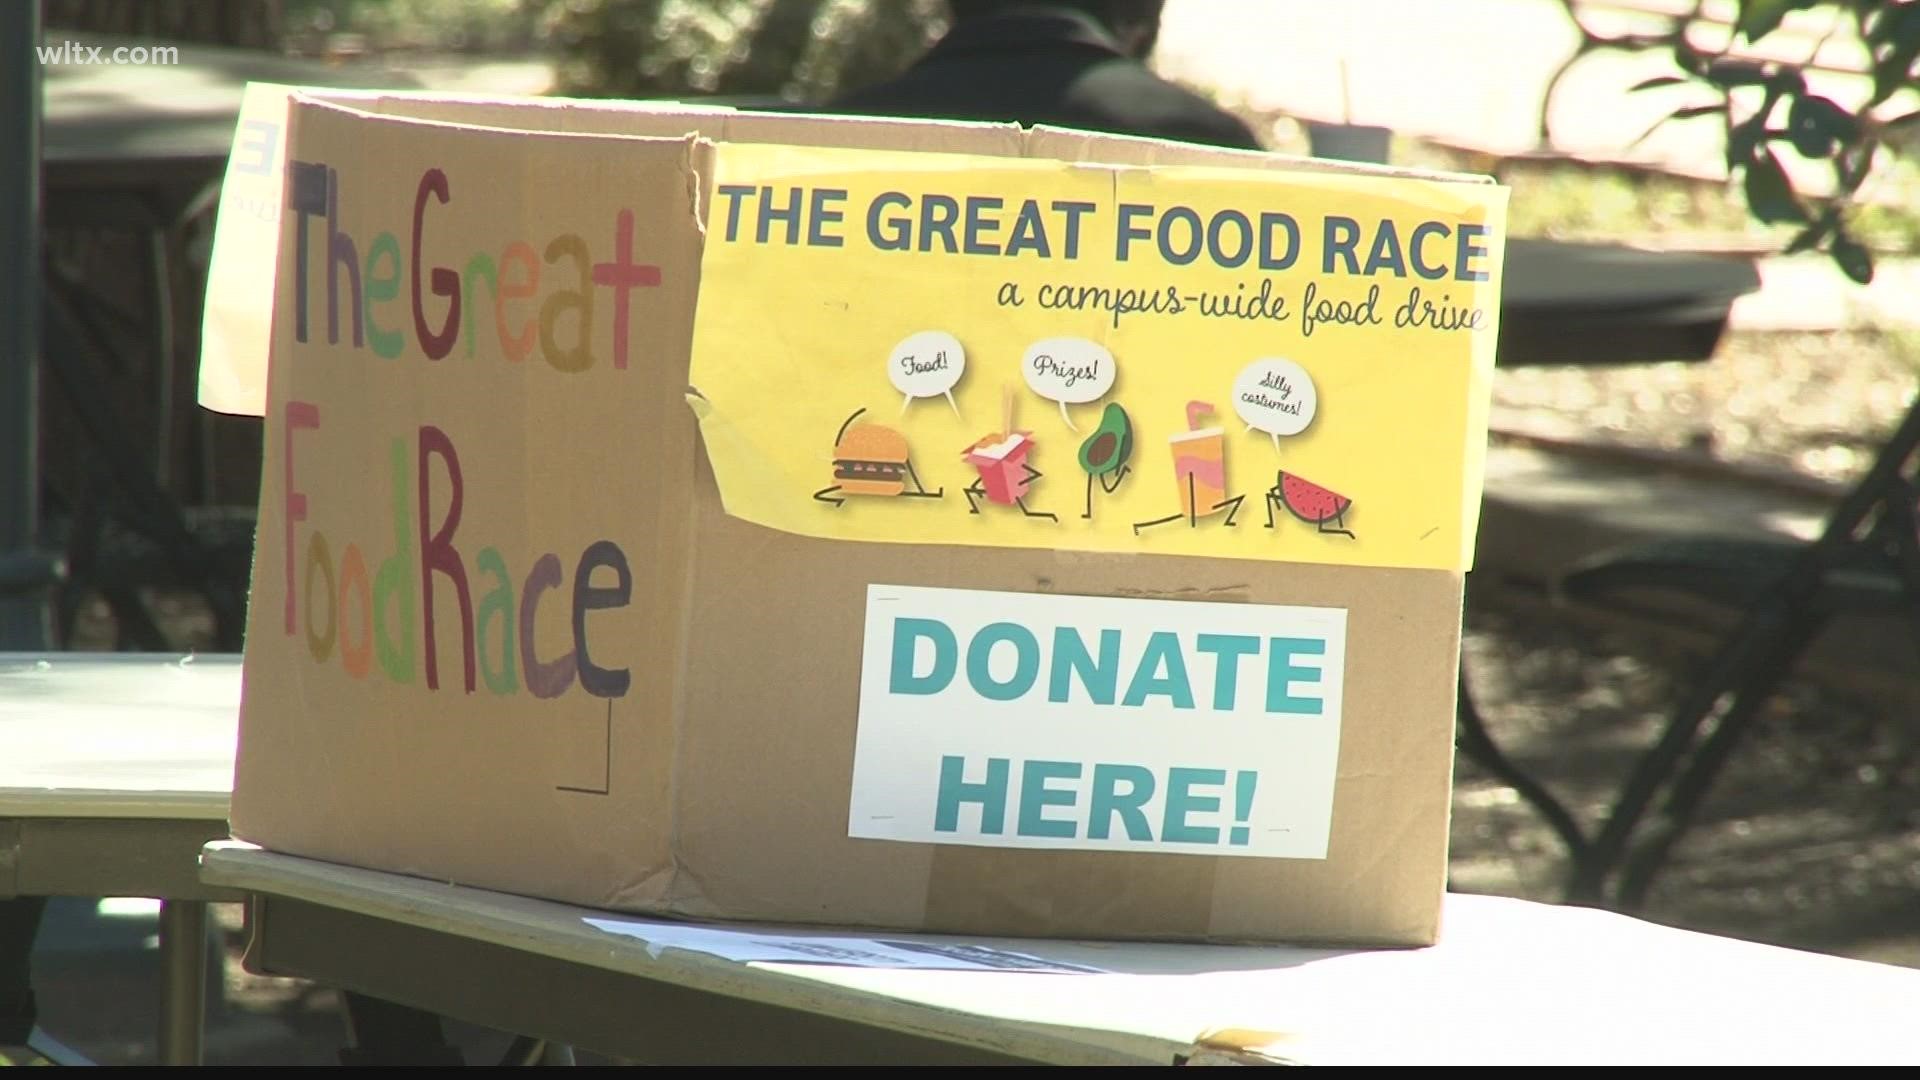 The food drive was to stock up the Gamecock pantry.